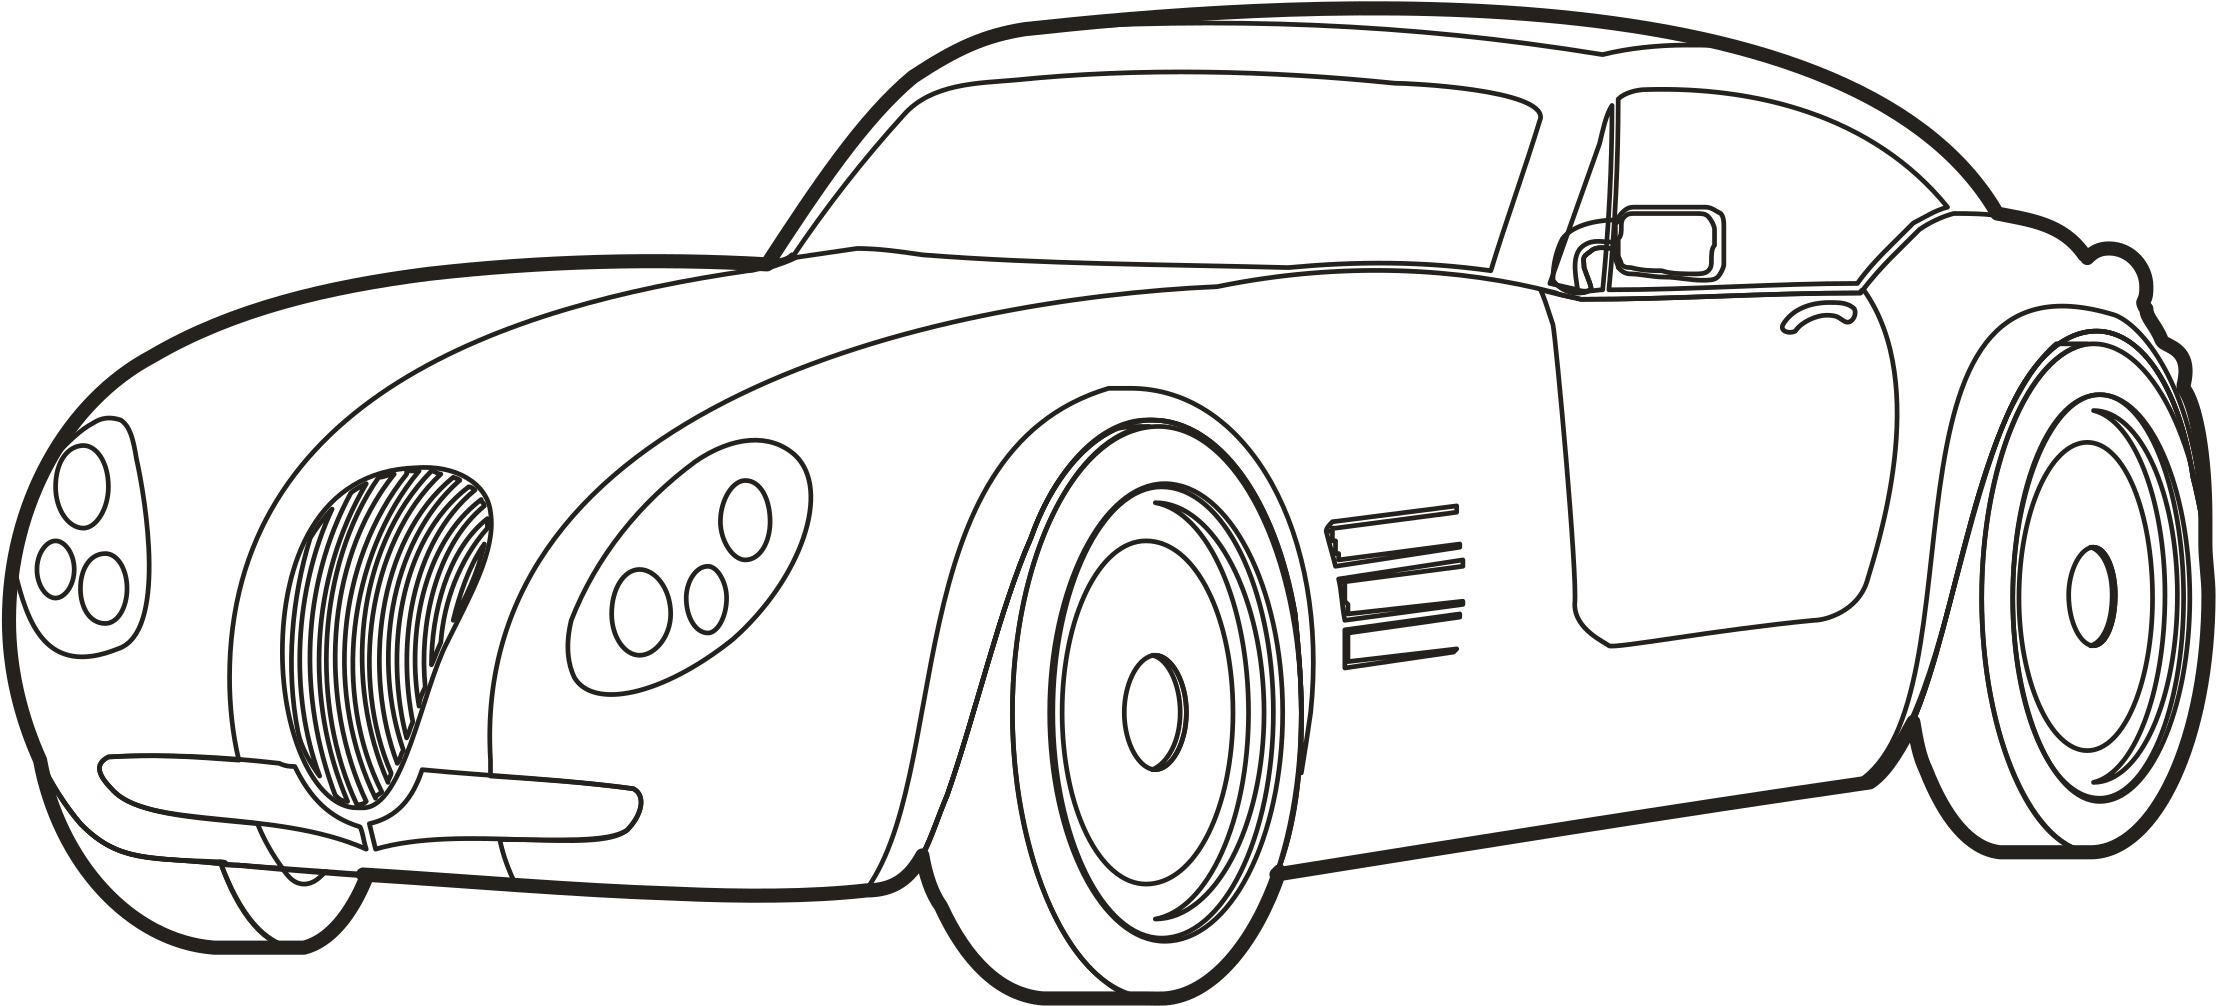 Drawing Sport Car Car Outline Drawing